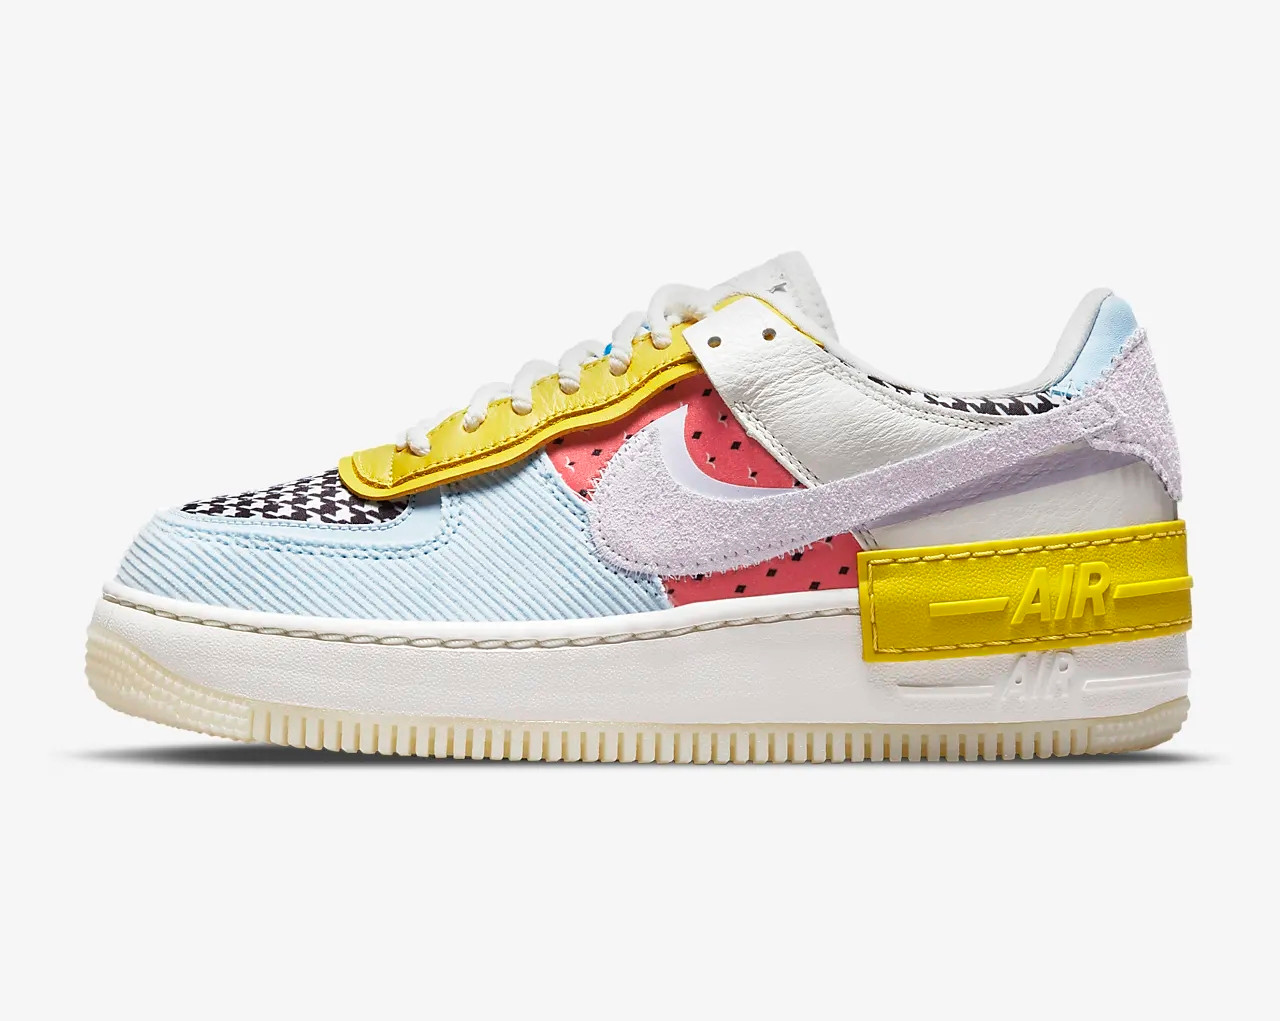 Nike Air Force 1 Low Shadow Multi Print Houndstooth Bright Citron ...